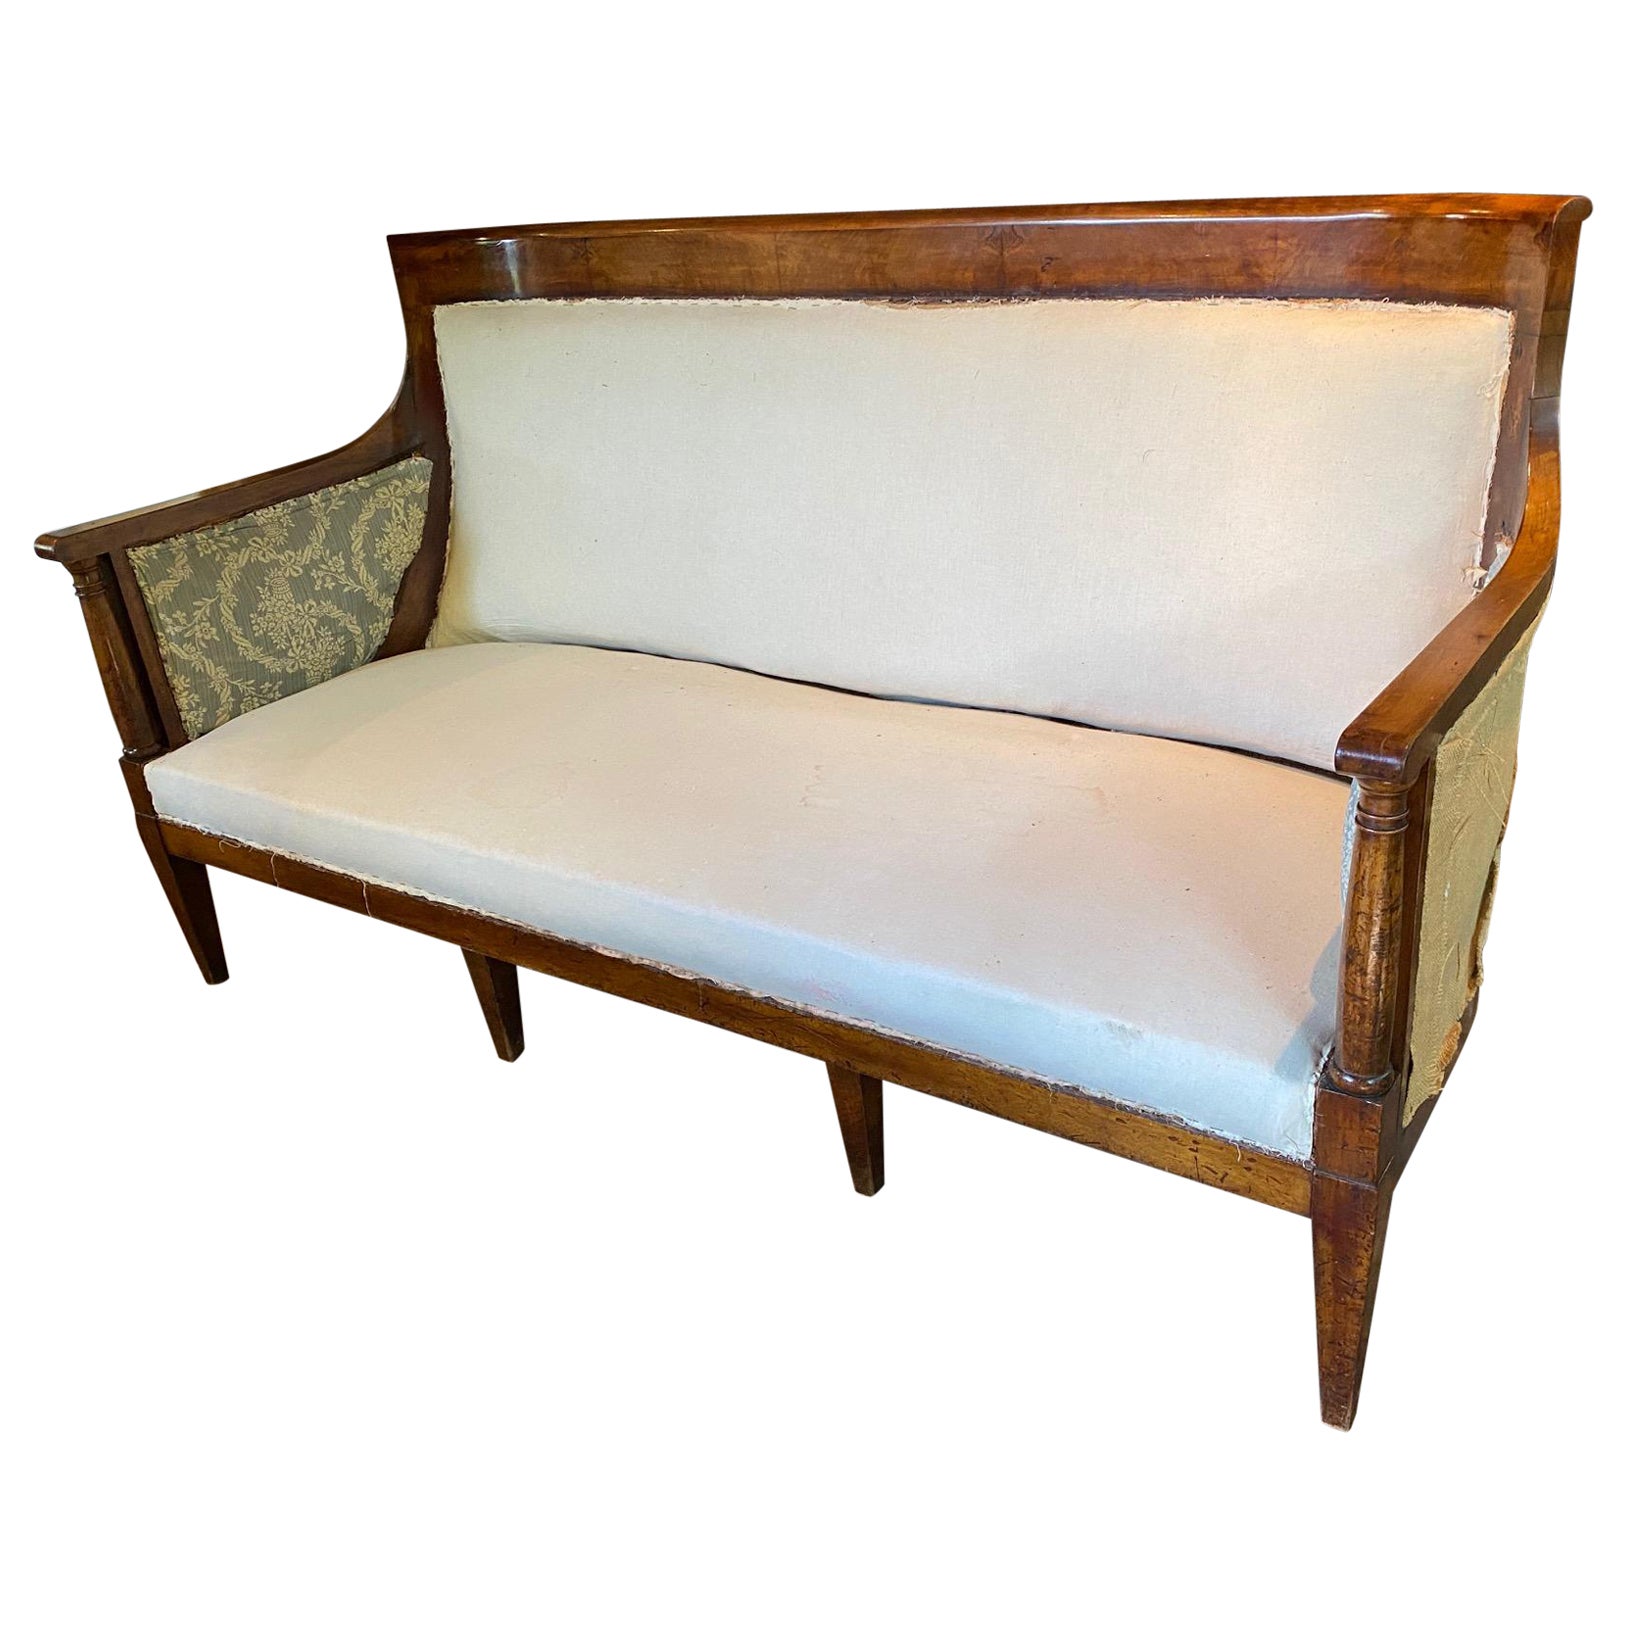 Elegant Directoire Period walnut sofa.
Needs to be reupholstered.